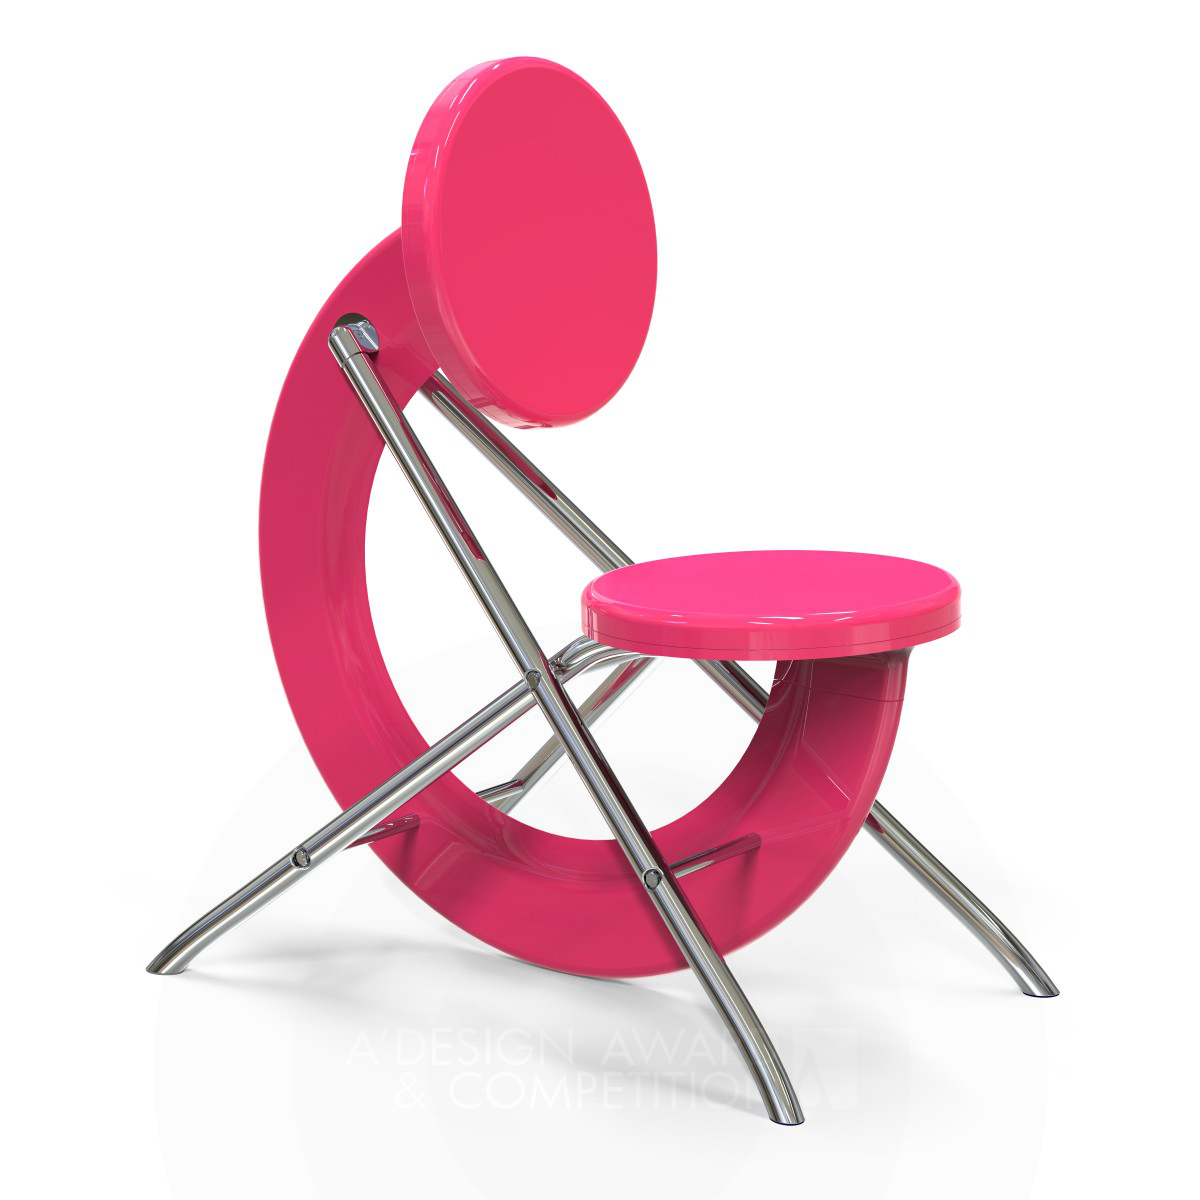 Unveiling "Chic" - A Remarkable Chair Design